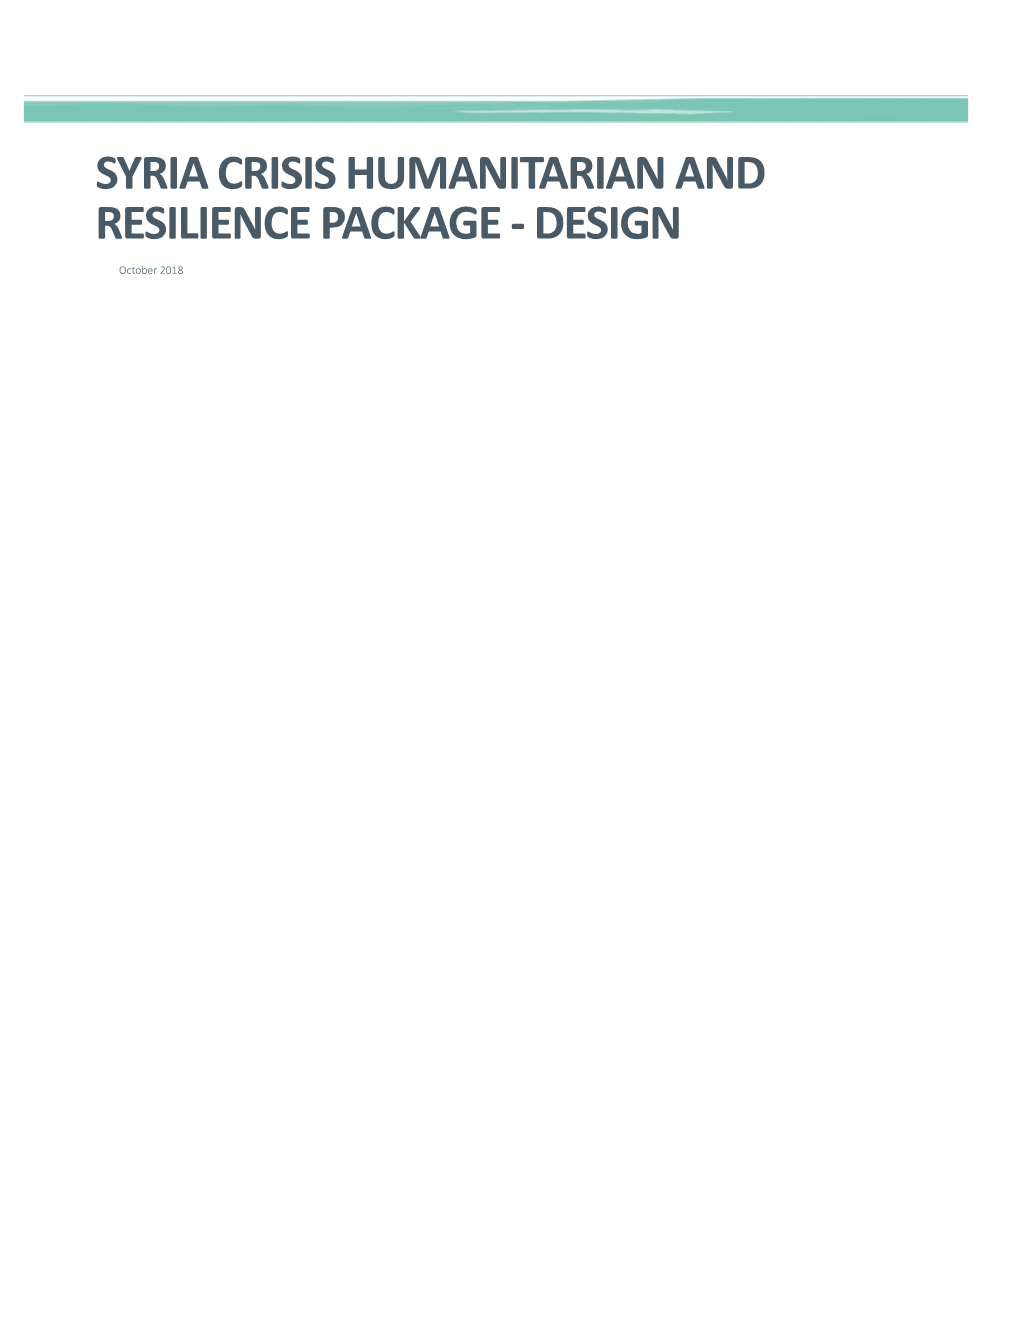 Syria Crisis Humanitarian and Resilience Package Design Document